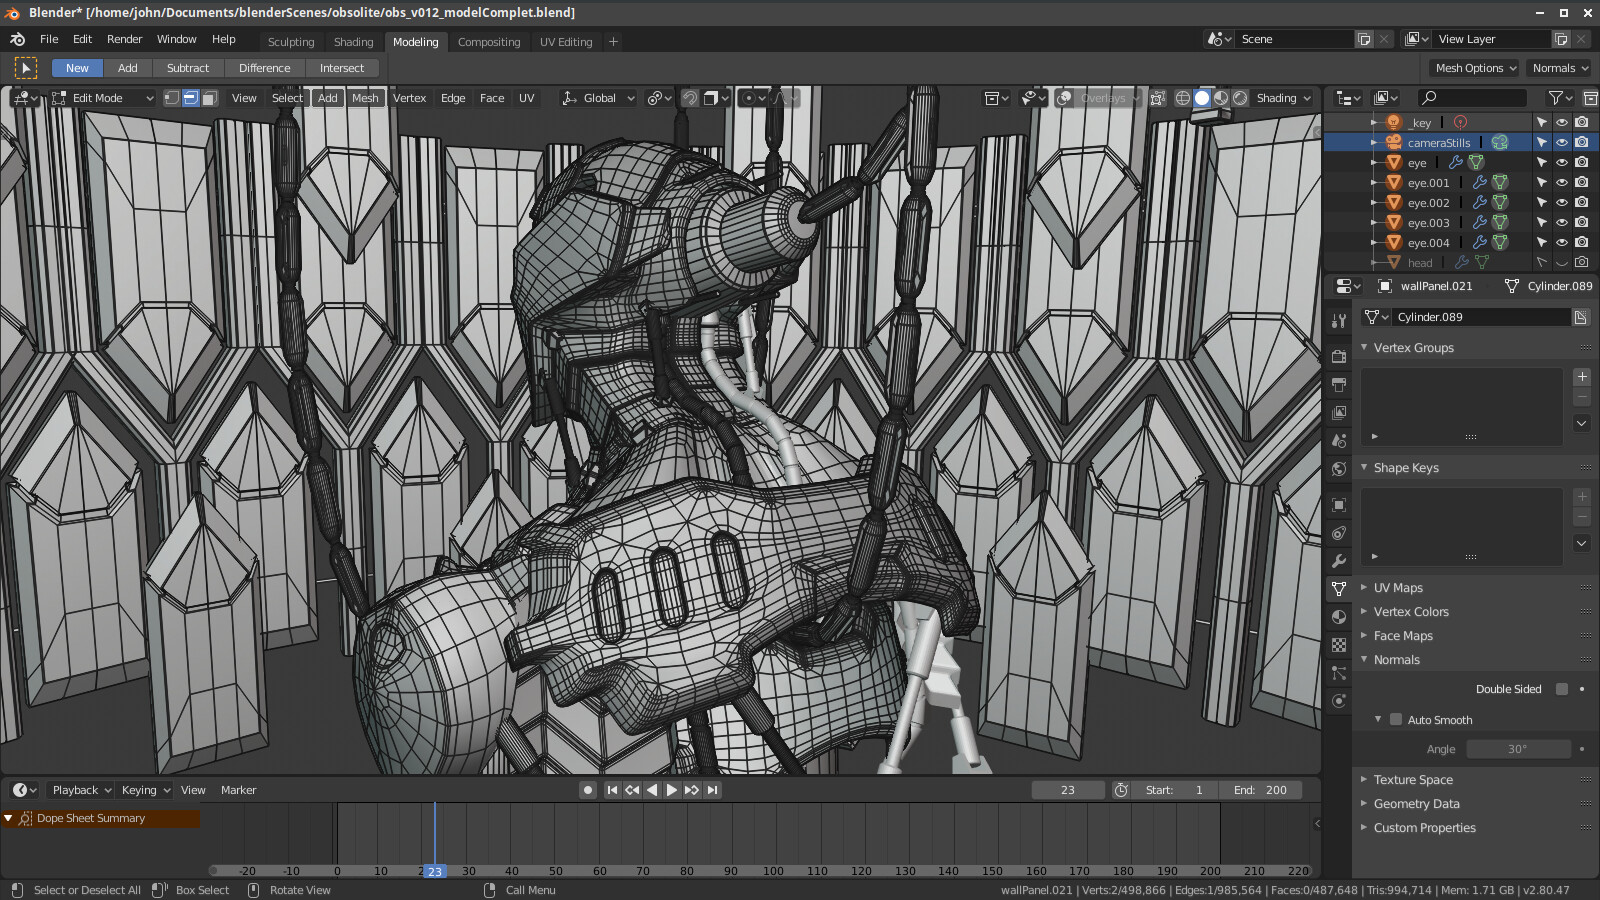 More wireframe 